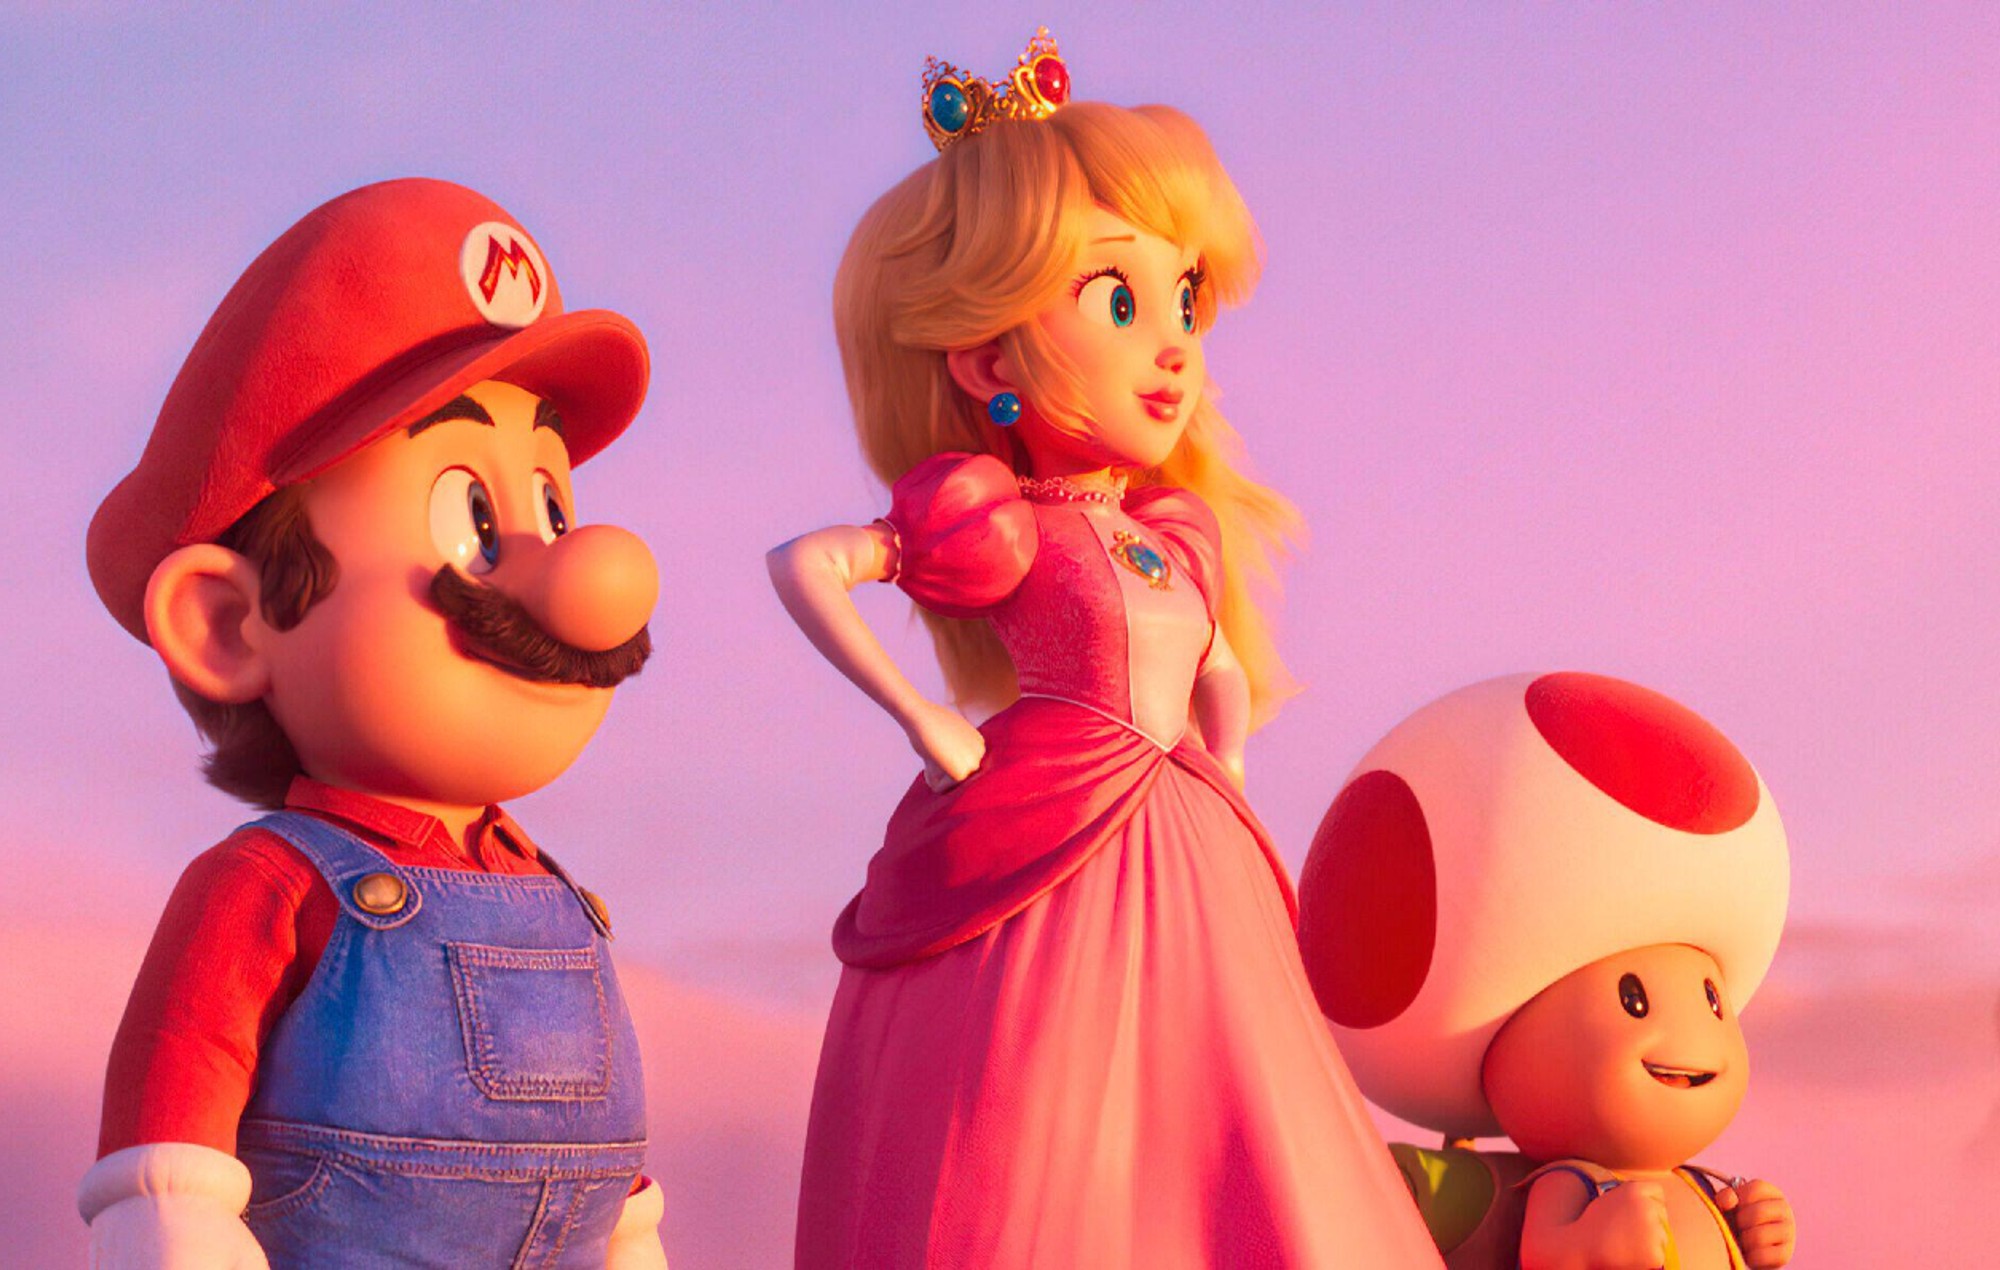 Super Mario Bros Movie Sequel Put on Hold as Writers’ Strike Halts Production